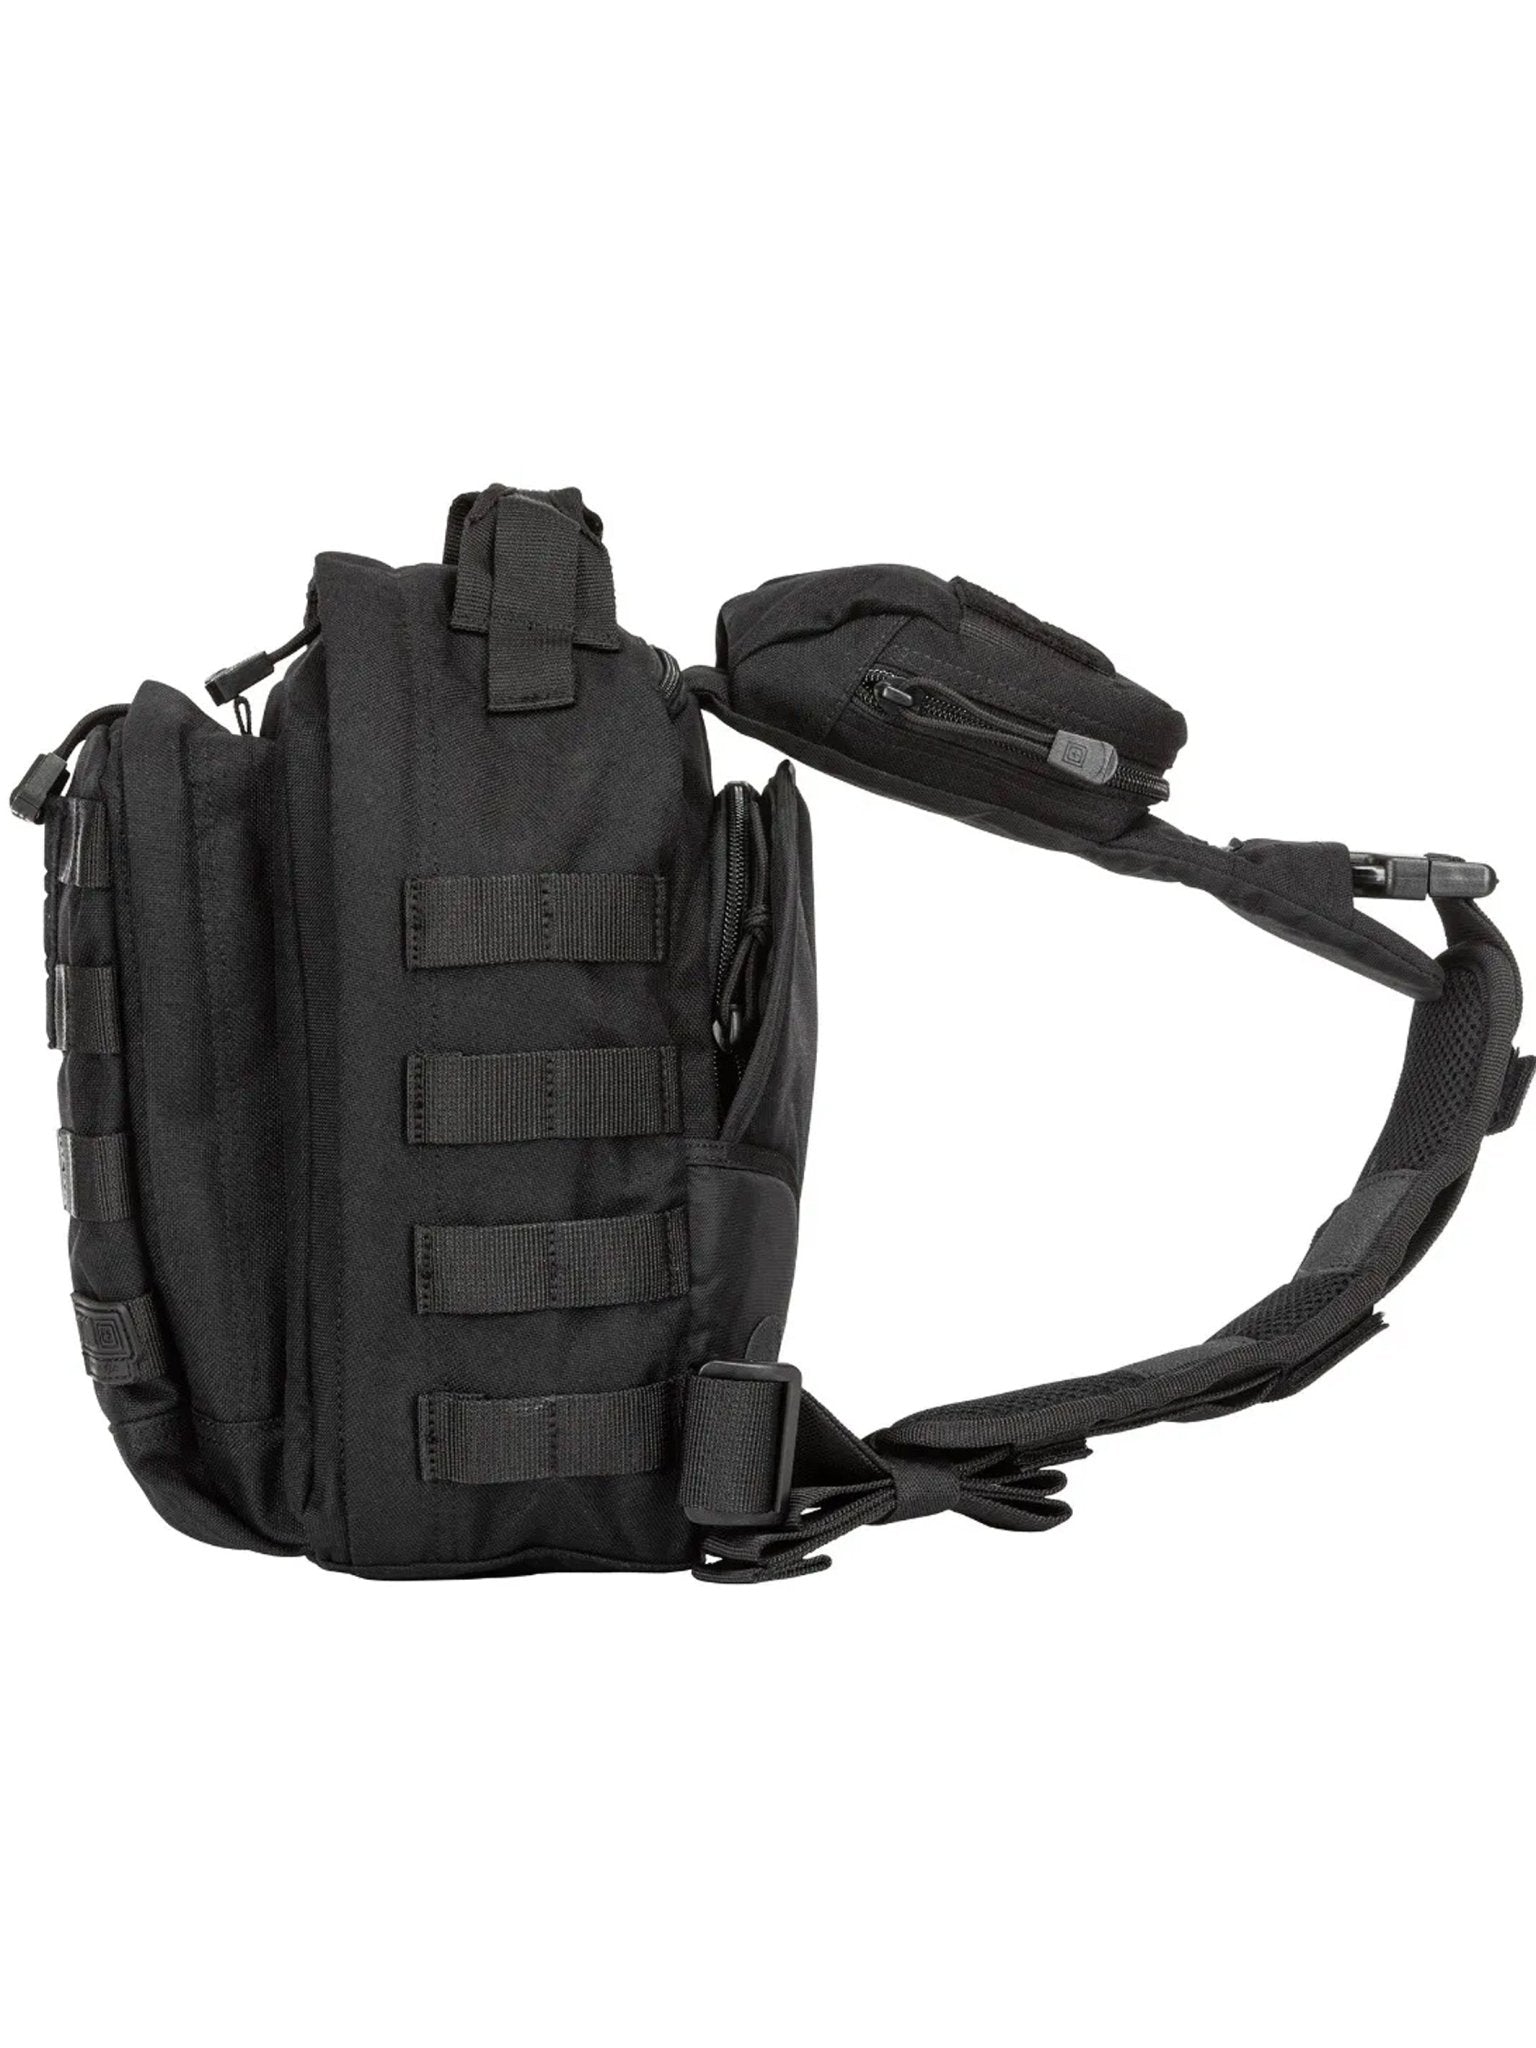 4elementsclothing5.11 Tactical5.11 Tactical - 5.11 Tactical MOAB™ 6 SLING PACK 11L - Style 56963Bag56963-026